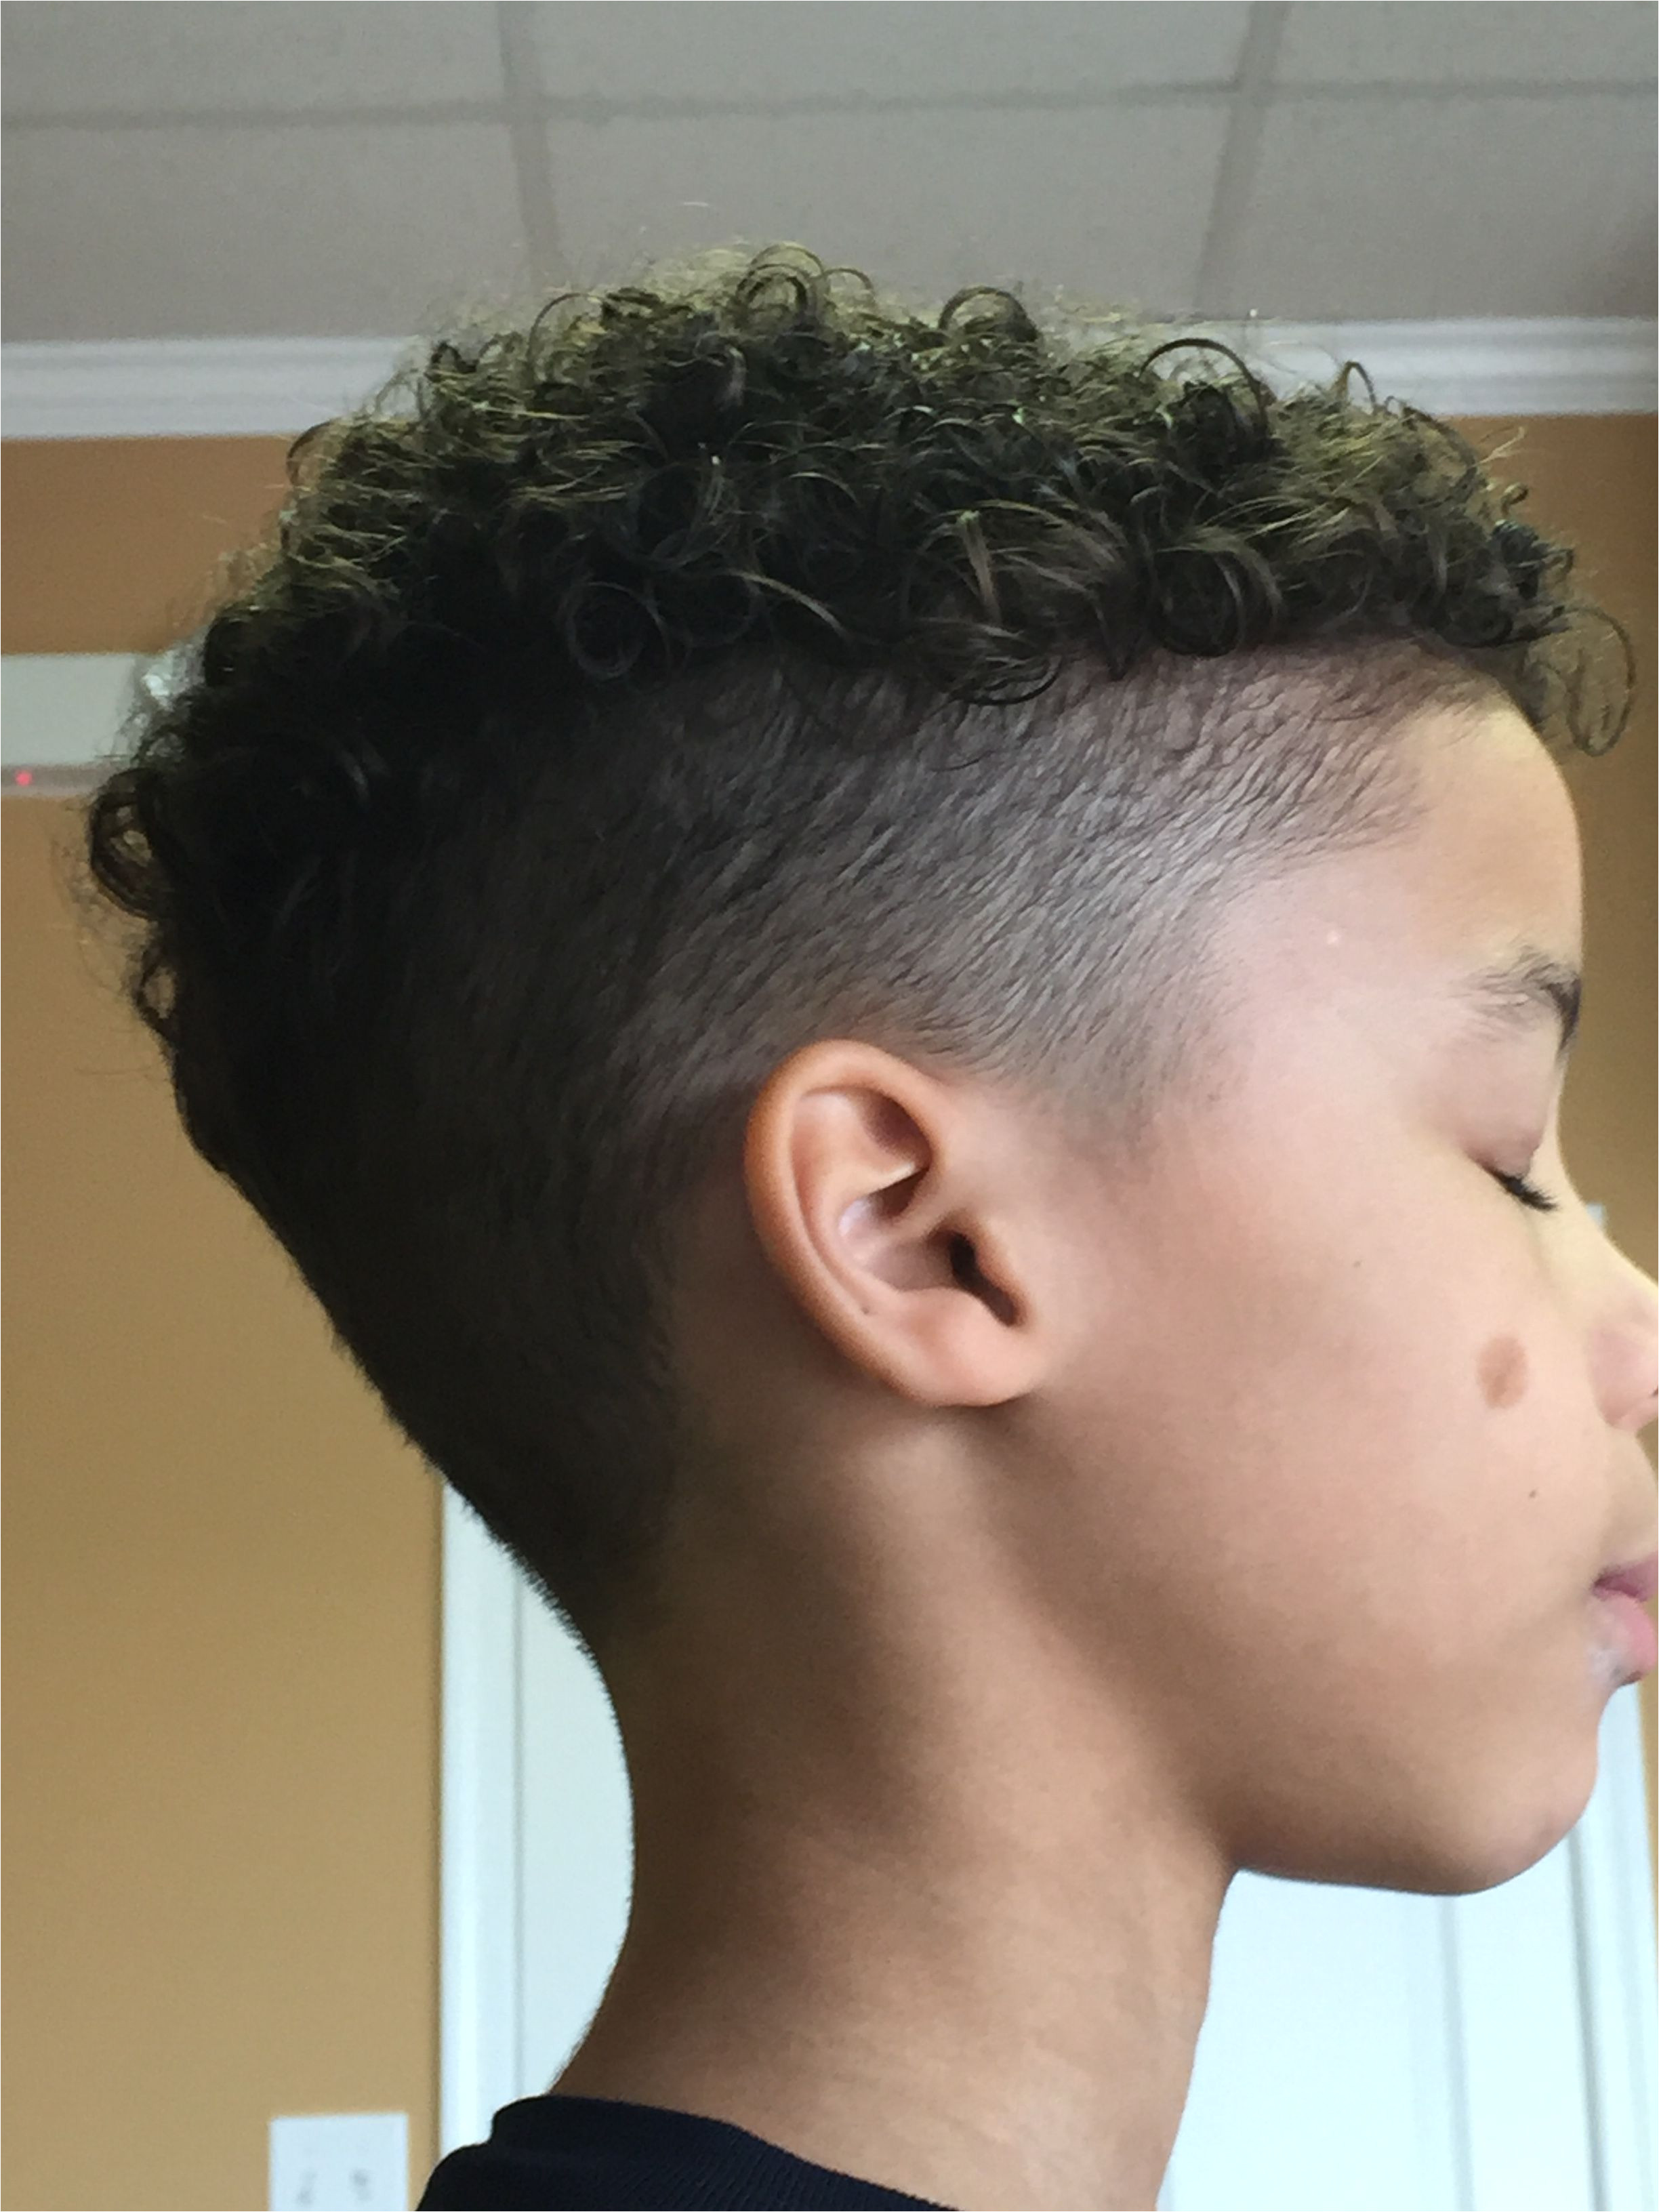 Hairstyles Mixed Race Boy Boys Curly Mixed Race Haircut asher Haircuts In 2019